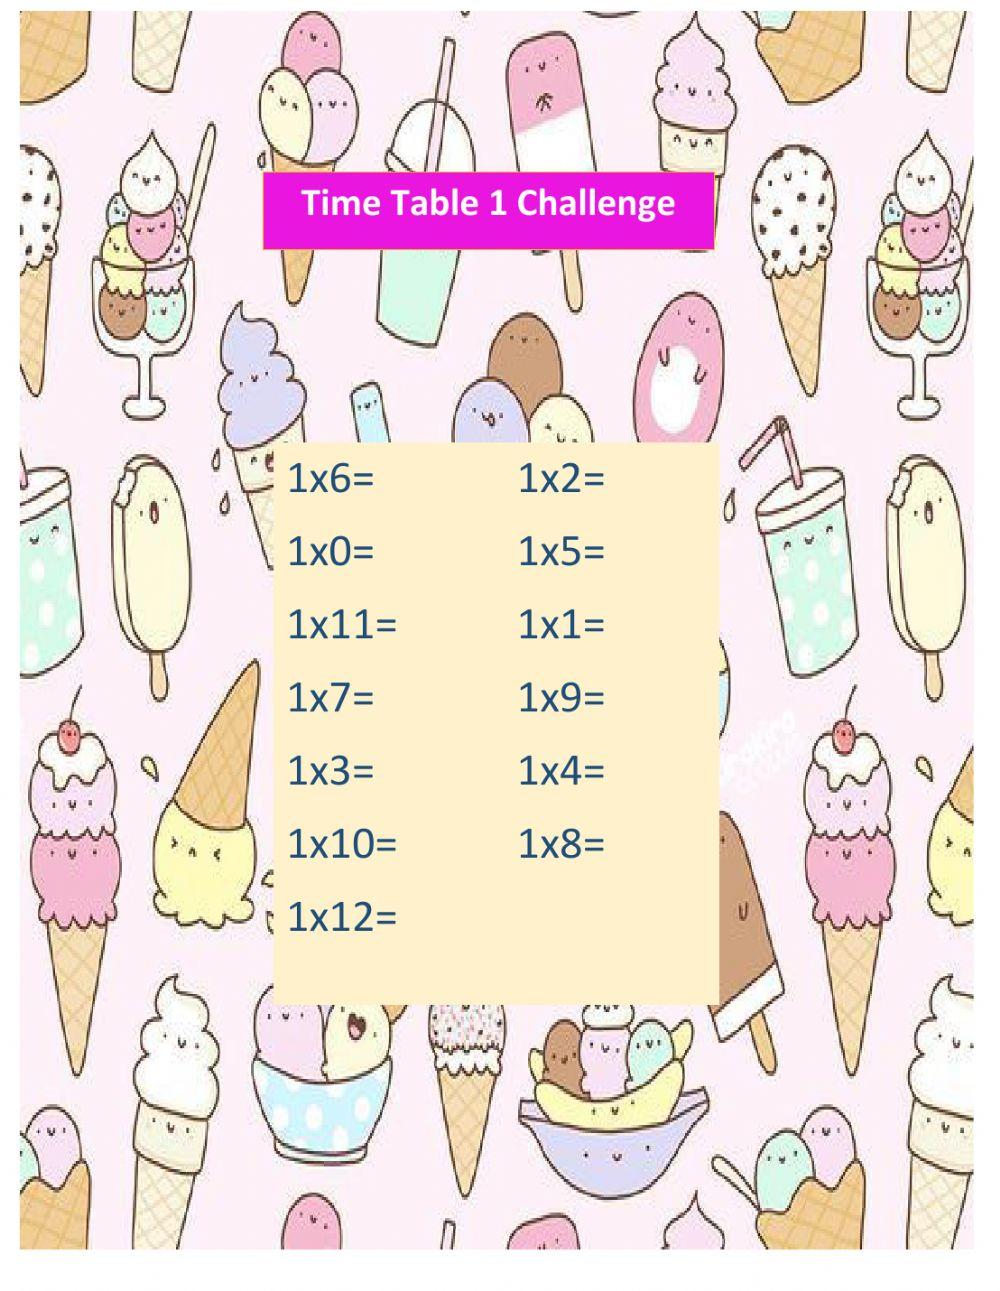 Time Table 1 Challenge